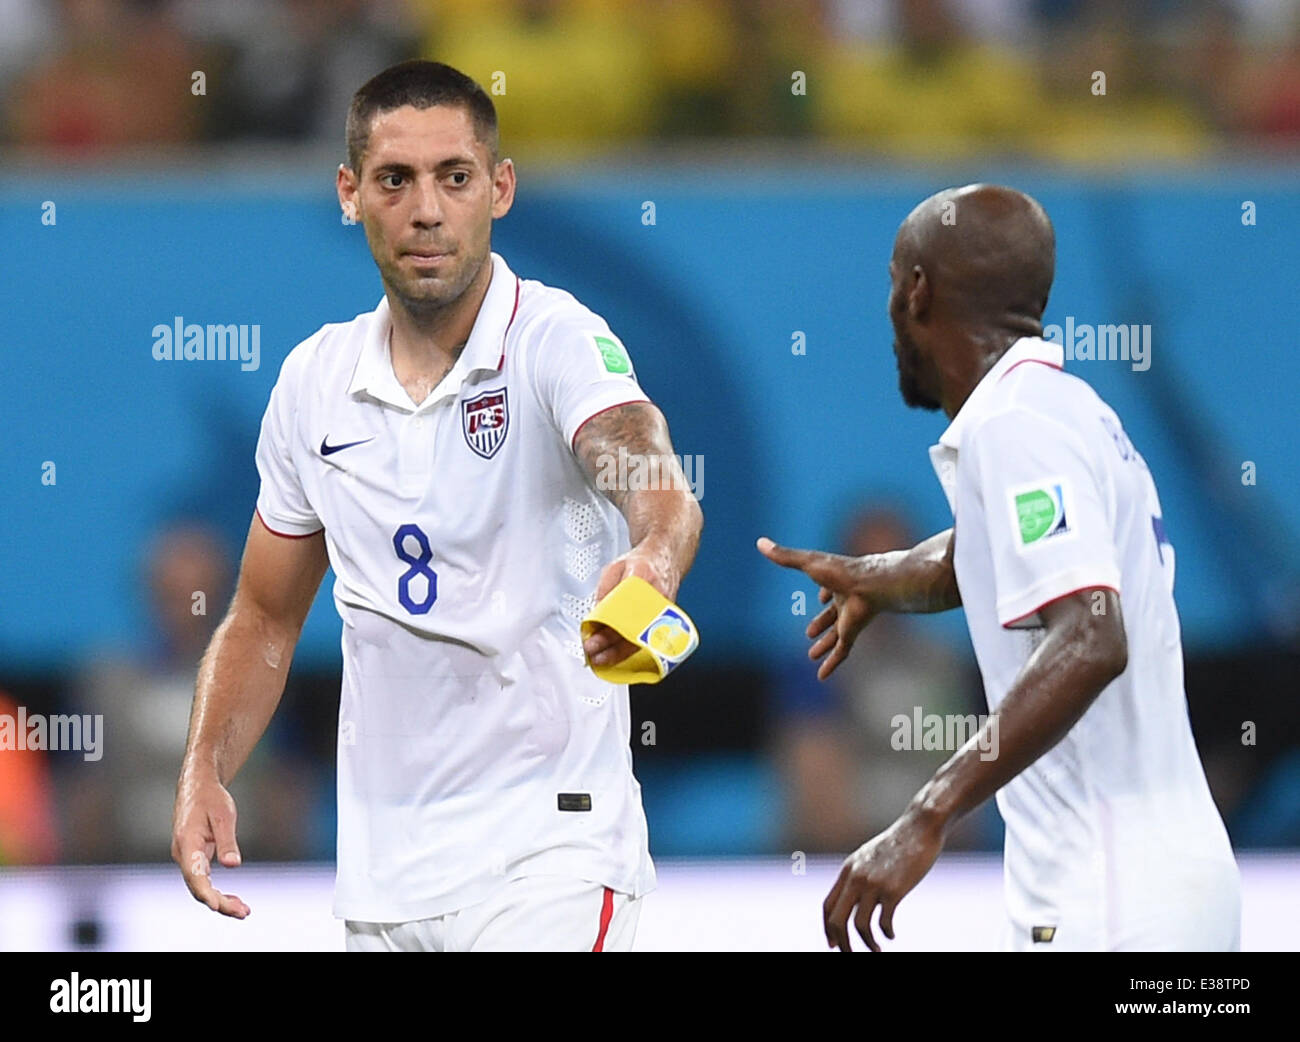 Manaus, Brazil. 22nd June, 2014. Clint Dempsey (L) of the USA on his way to the substitution during the the FIFA World Cup 2014 group G preliminary round match between the USA and Portugal at the Arena Amazonia Stadium in Manaus, Brazil, 22 June 2014. Photo: Marius Becker/dpa/Alamy Live News Stock Photo